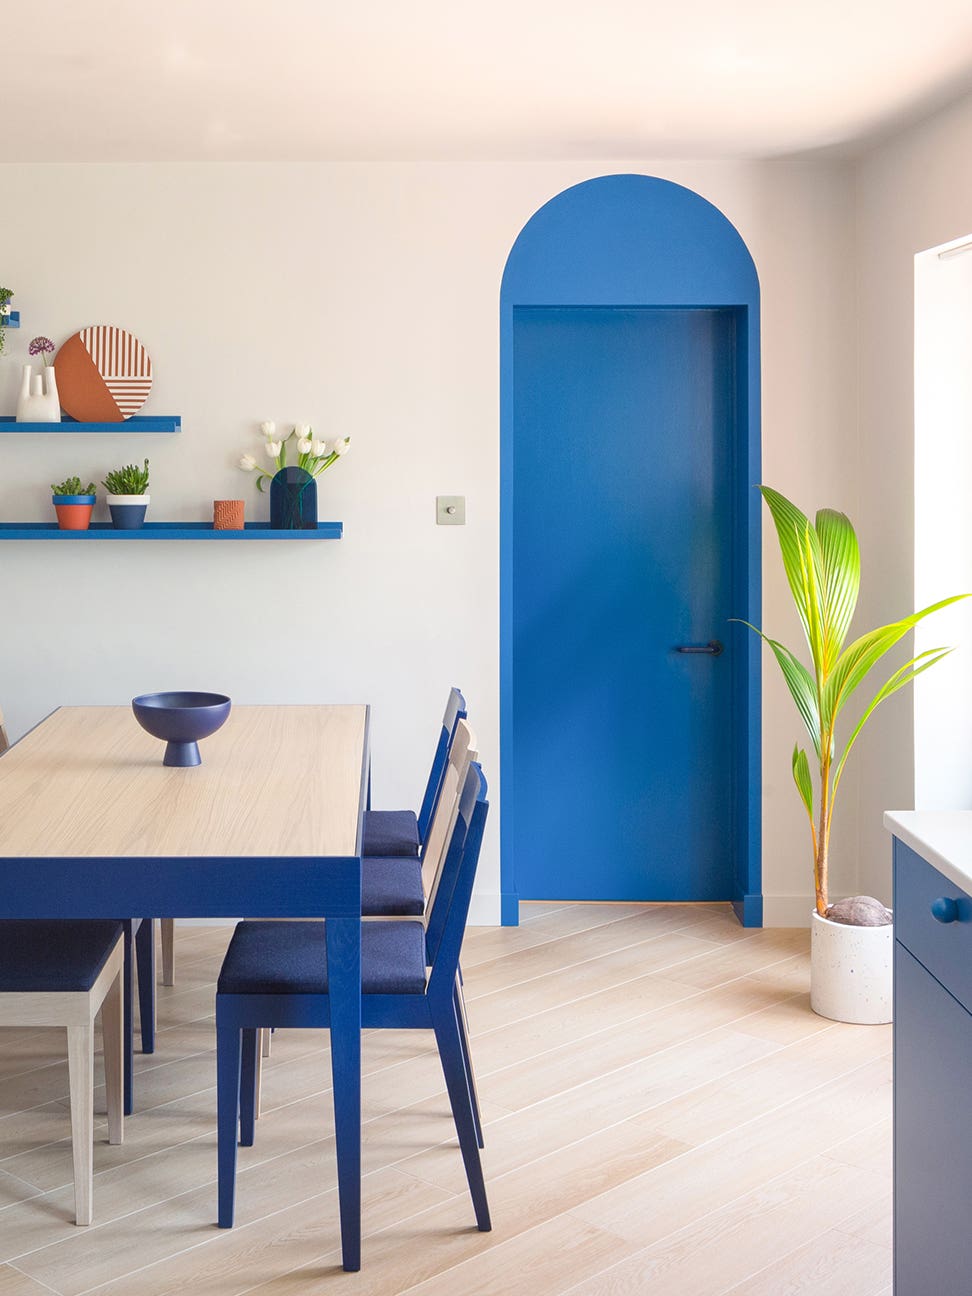 This Bold Blue Kitchen Taught Us a Reno Shortcut: Invert the Color Palette